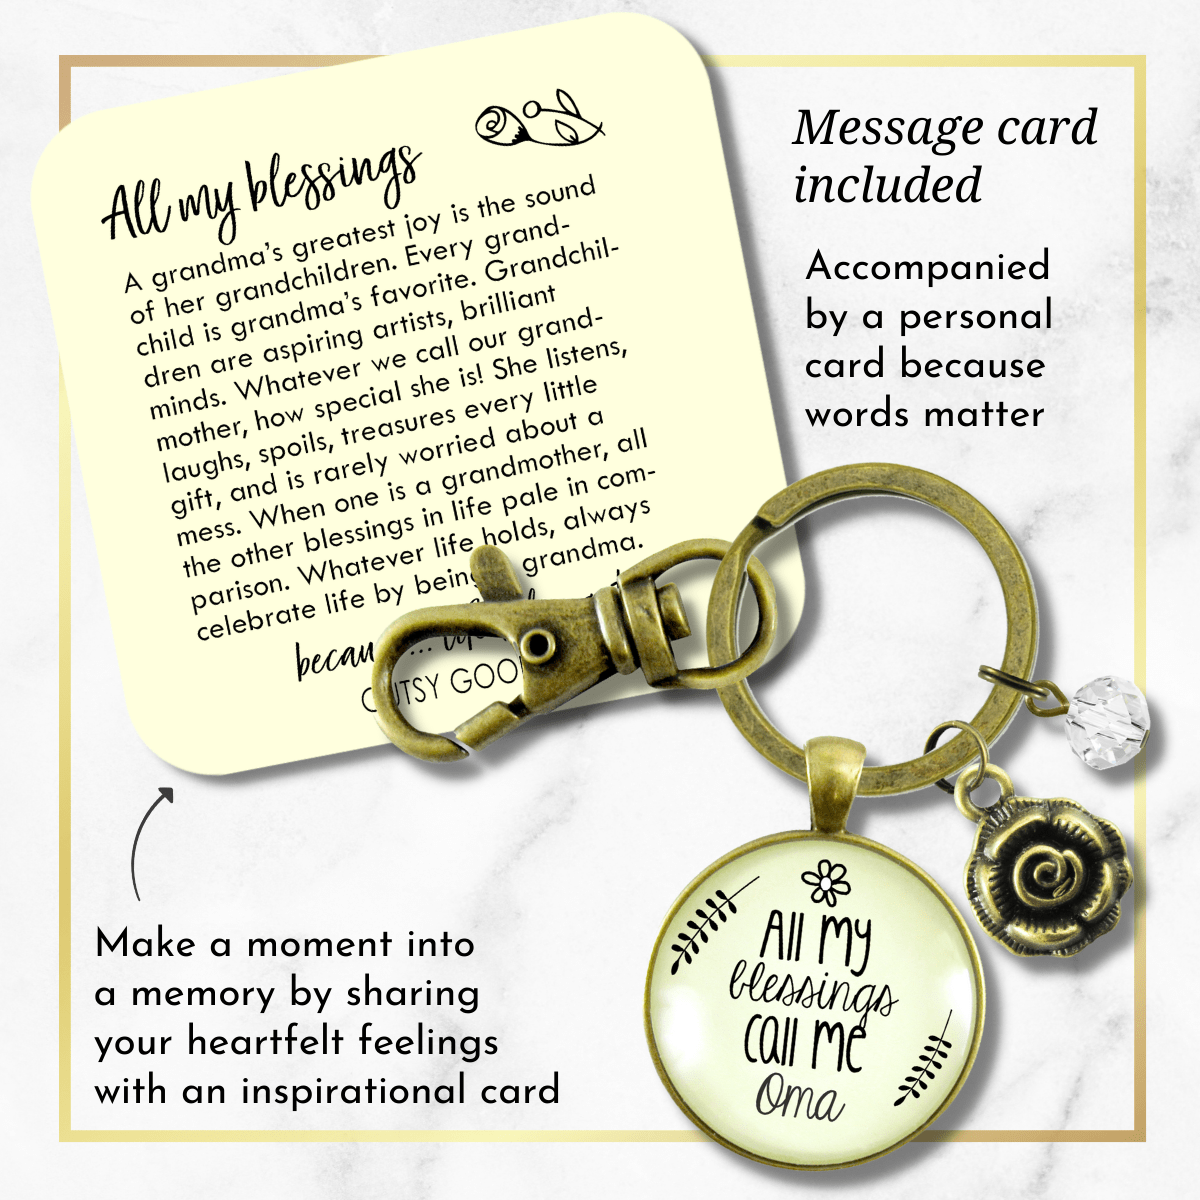 Oma Keychain All My Blessings Call Me Oma Gift Quote Charm Jewelry Gift Flower - Gutsy Goodness Handmade Jewelry;Oma Keychain All My Blessings Call Me Oma Gift Quote Charm Jewelry Gift Flower - Gutsy Goodness Handmade Jewelry Gifts